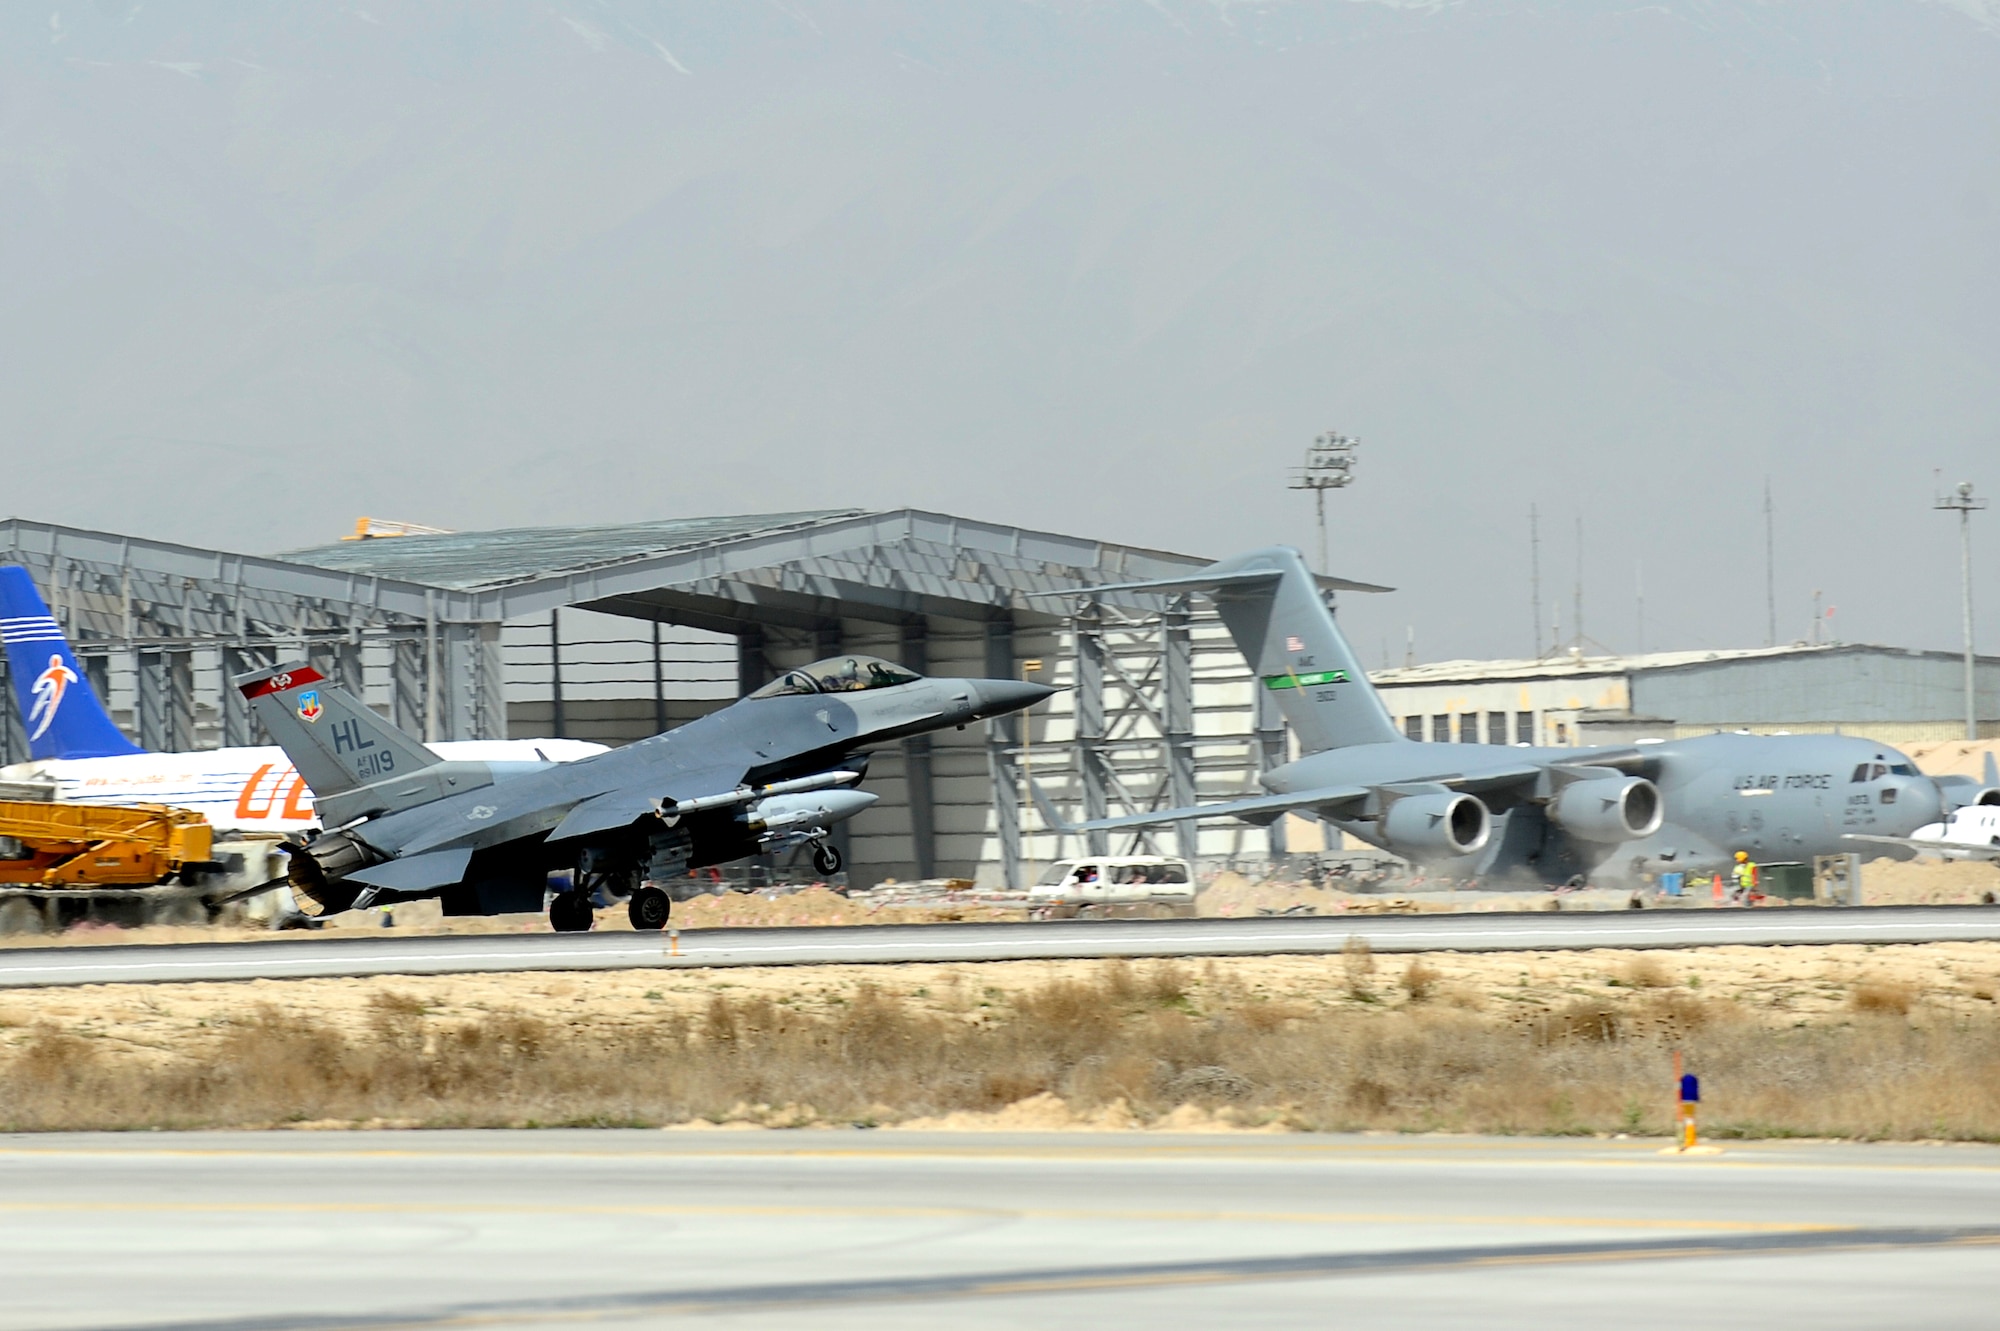 A U.S. Air Force F-16 lands at Bagram Airfield, Afghanistan, after completing 30 code 1 flights, March 23, 2010. (U.S. Air Force photo by/ Tech. Sgt. Jeromy K. Cross/released)